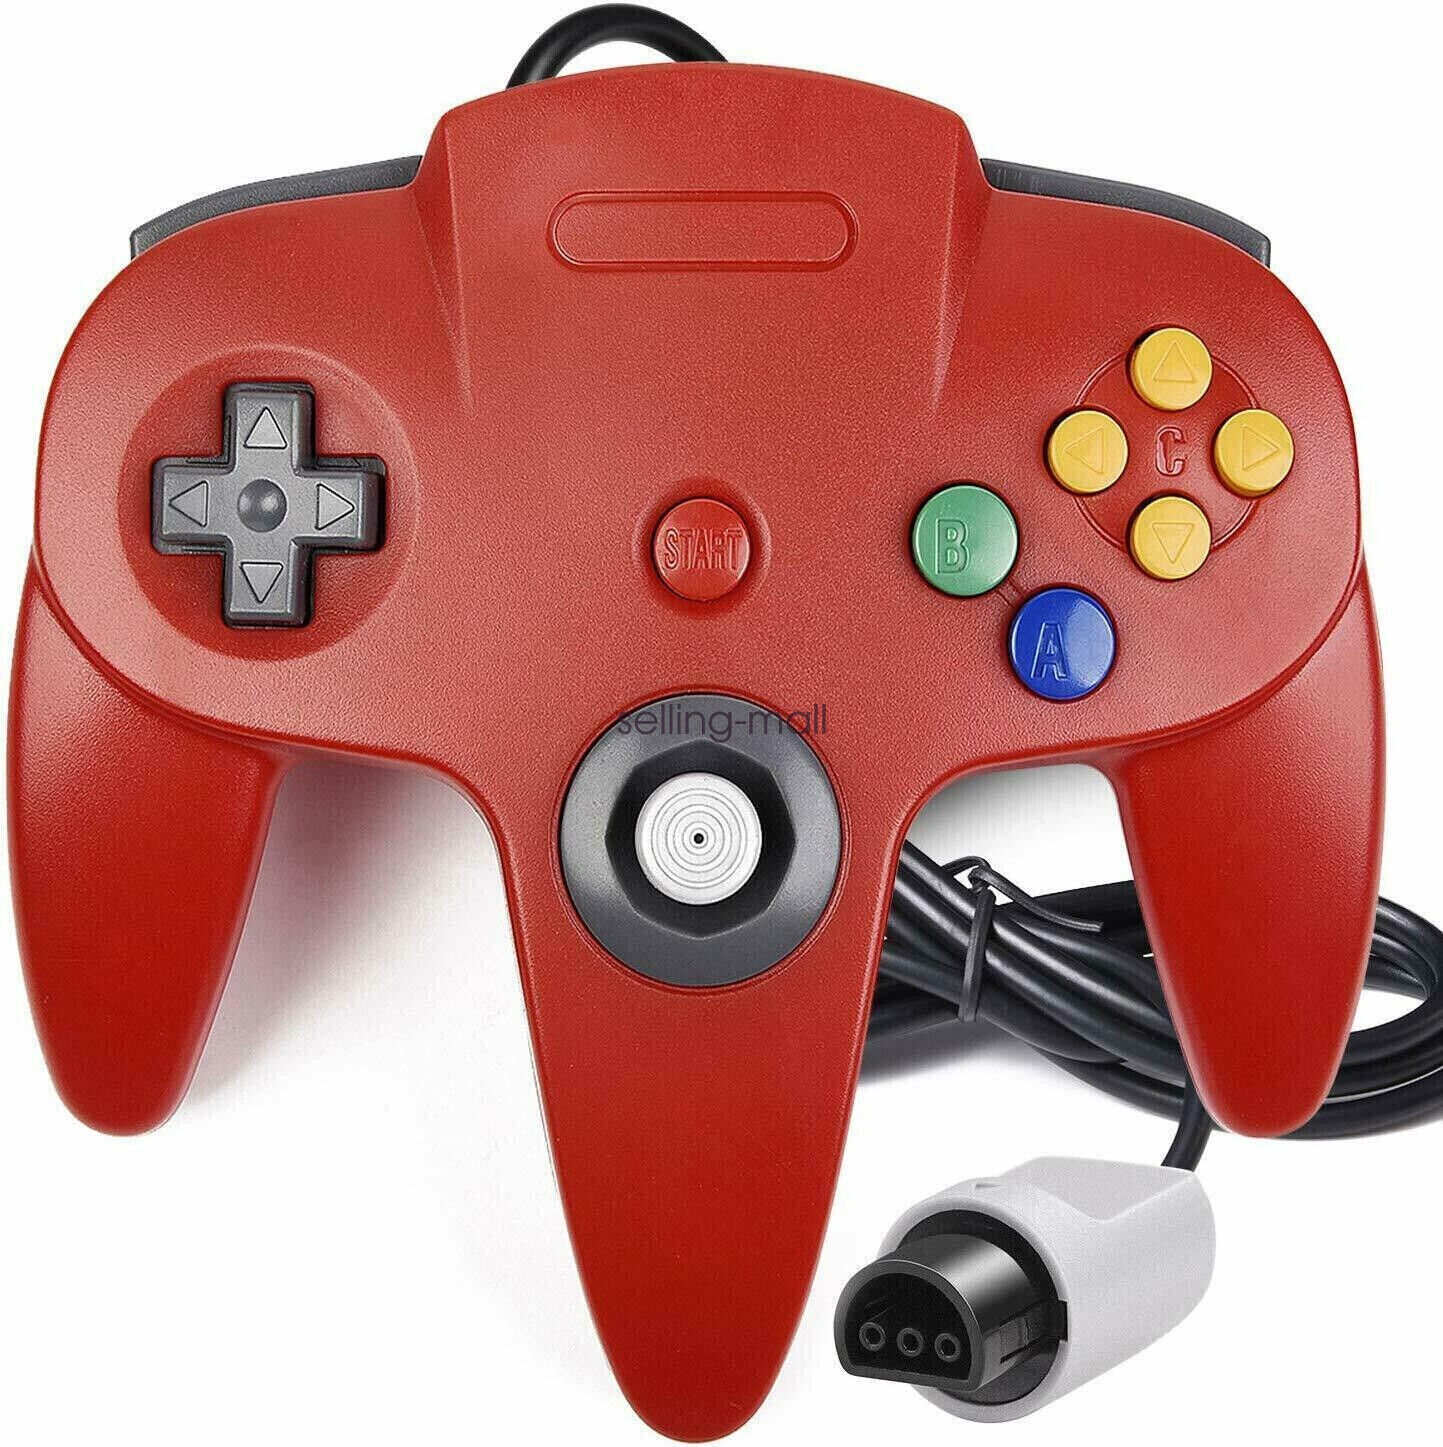 Wired Classic Retro N64 Gamepad Remote Joystick for N64 Console Video Game